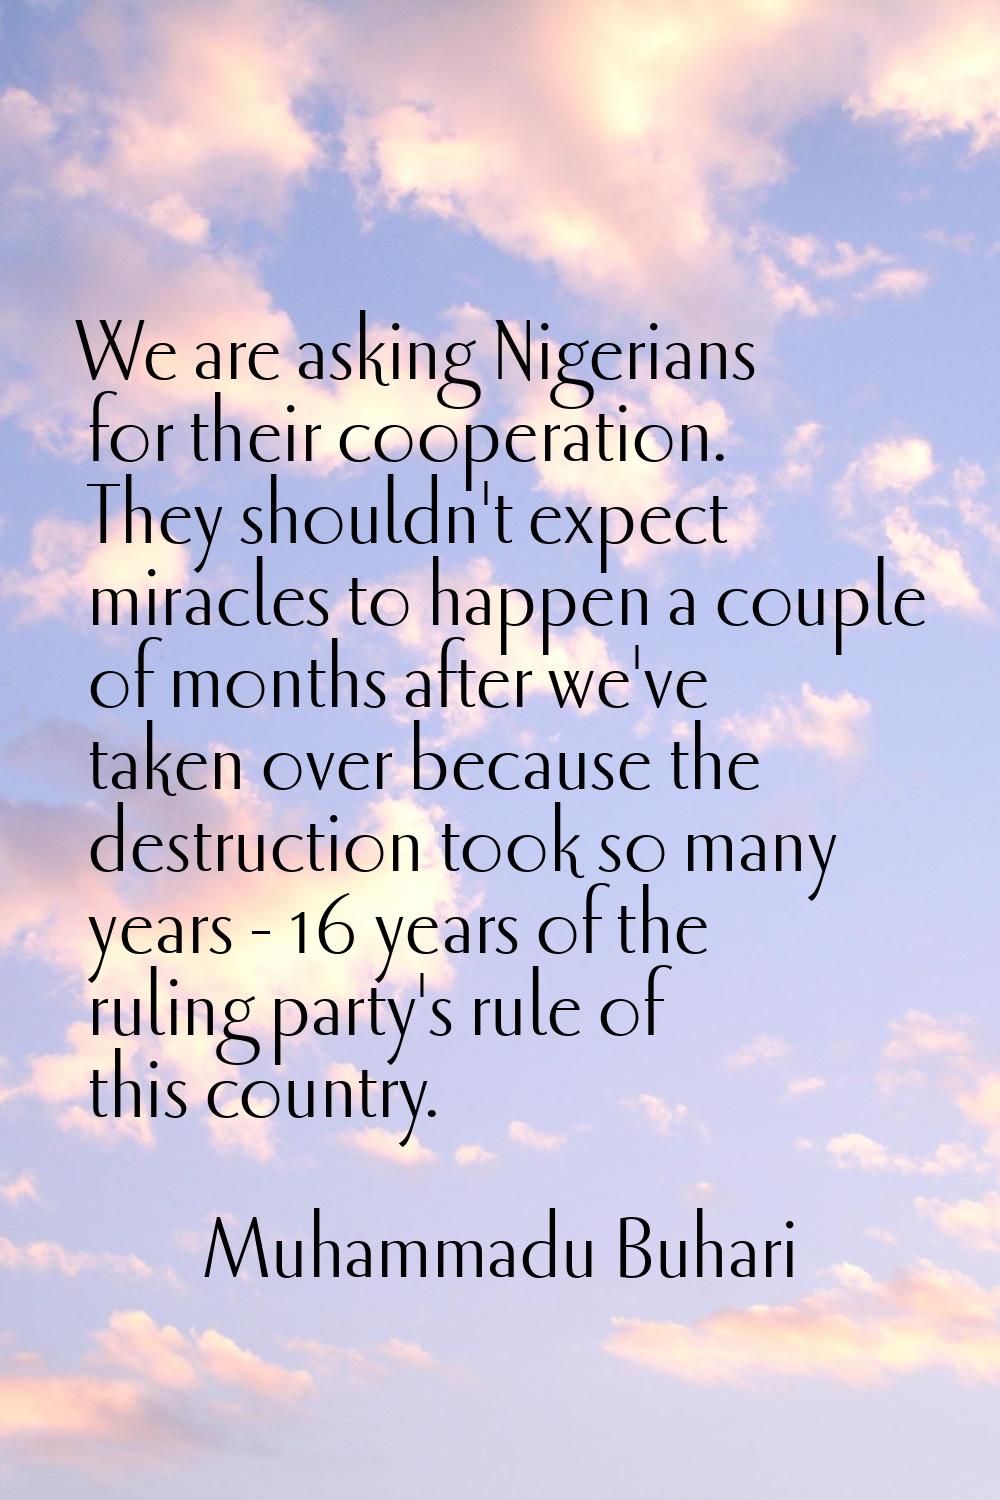 We are asking Nigerians for their cooperation. They shouldn't expect miracles to happen a couple of